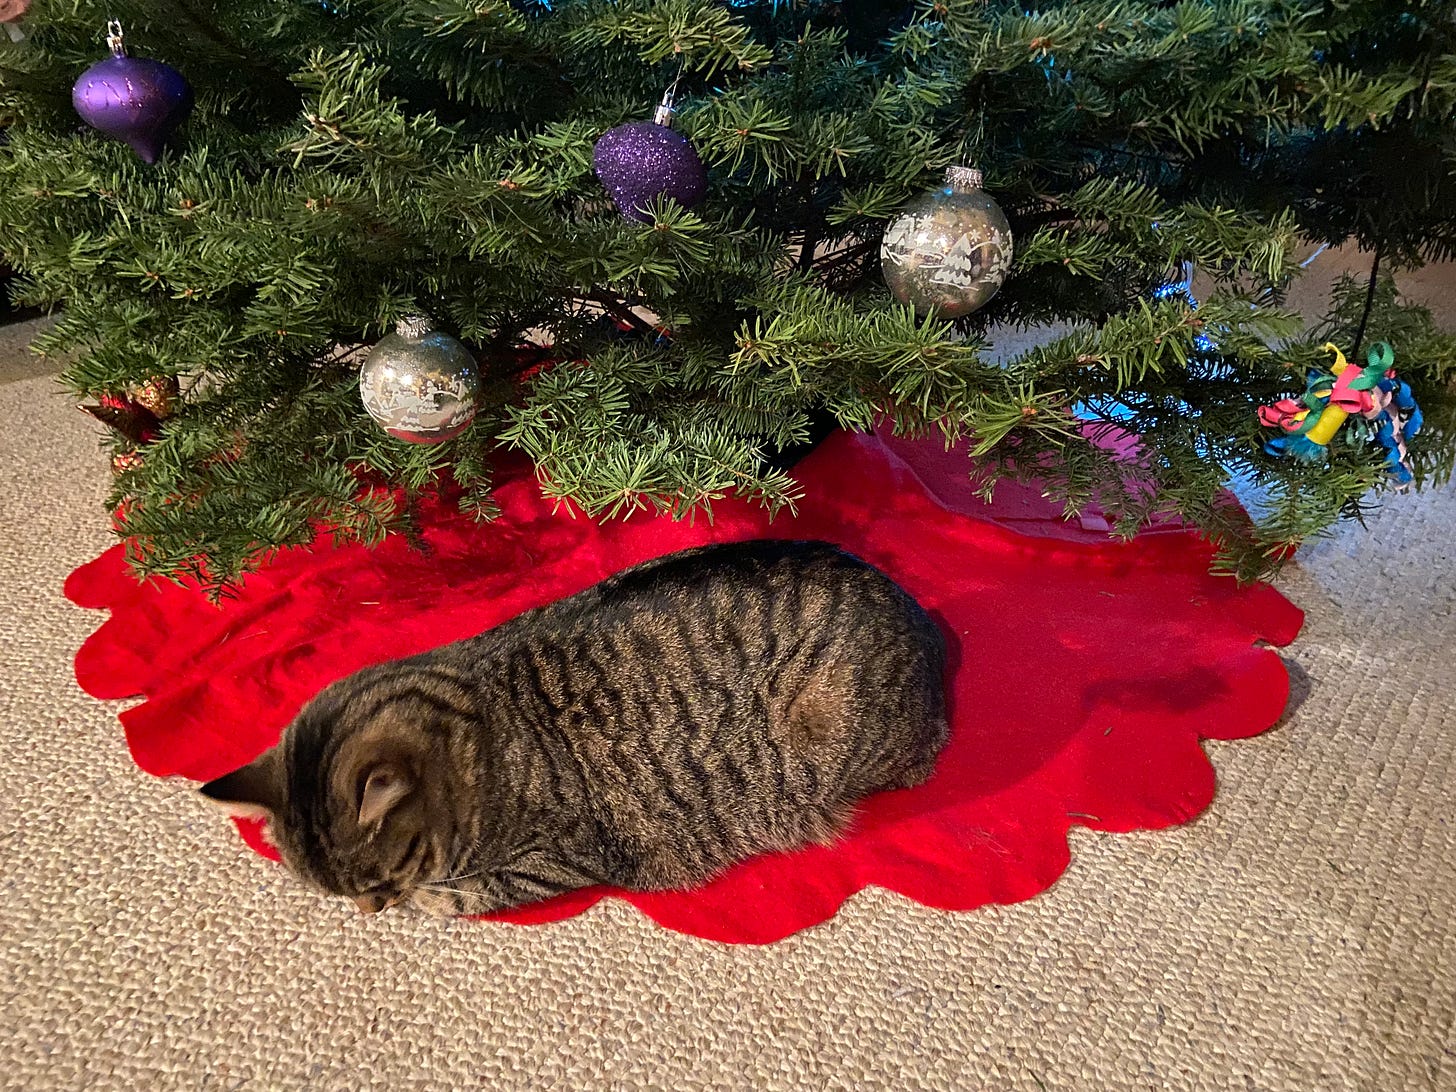 Cat dozing on a red flannel tree skirt under a Christmas tree